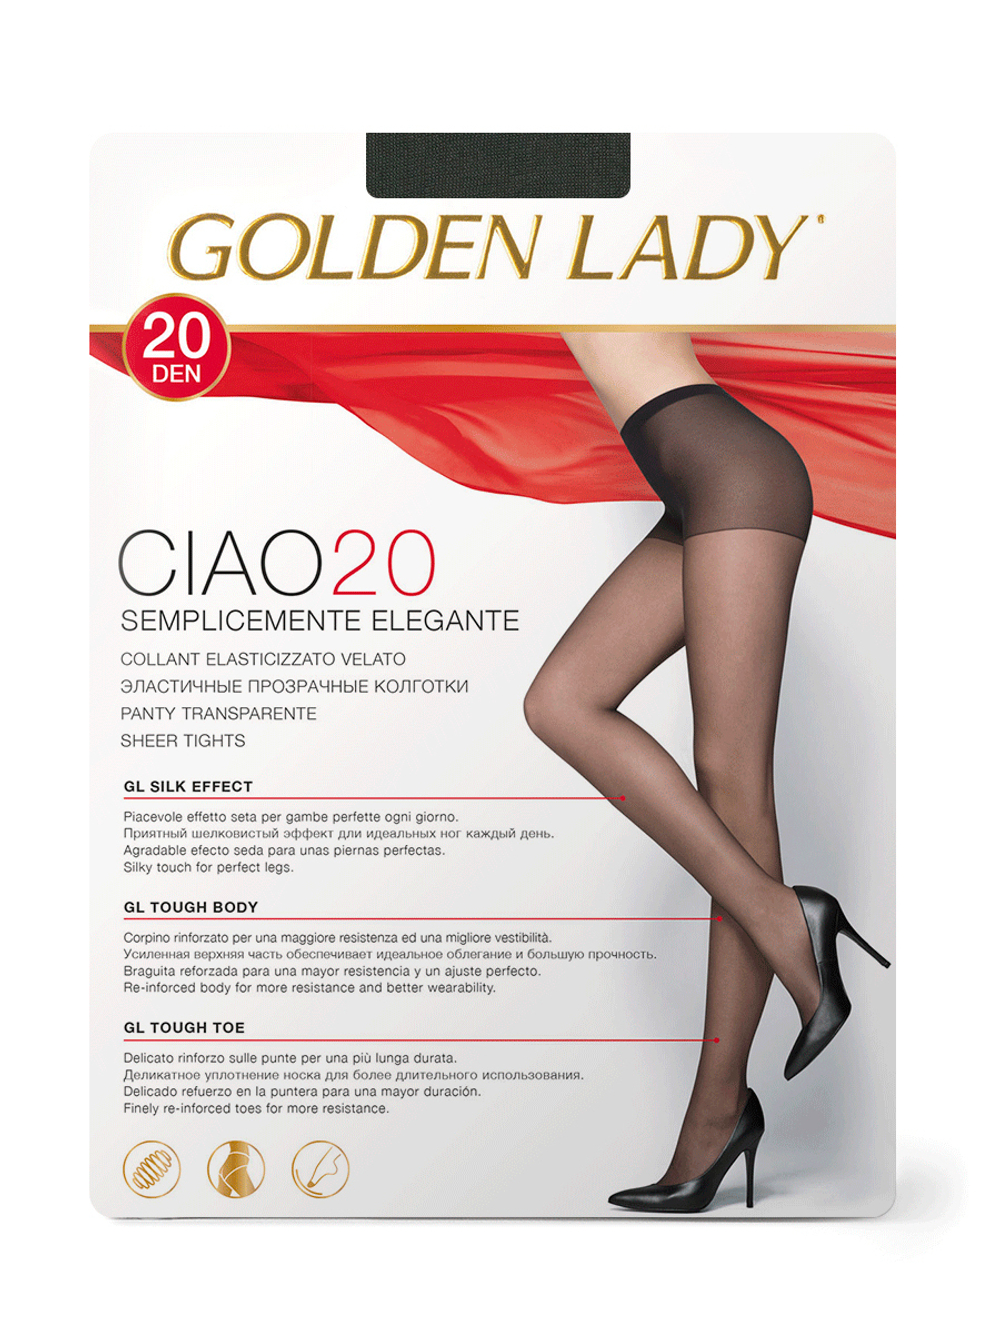 Golden Lady Ciao 20 (С)